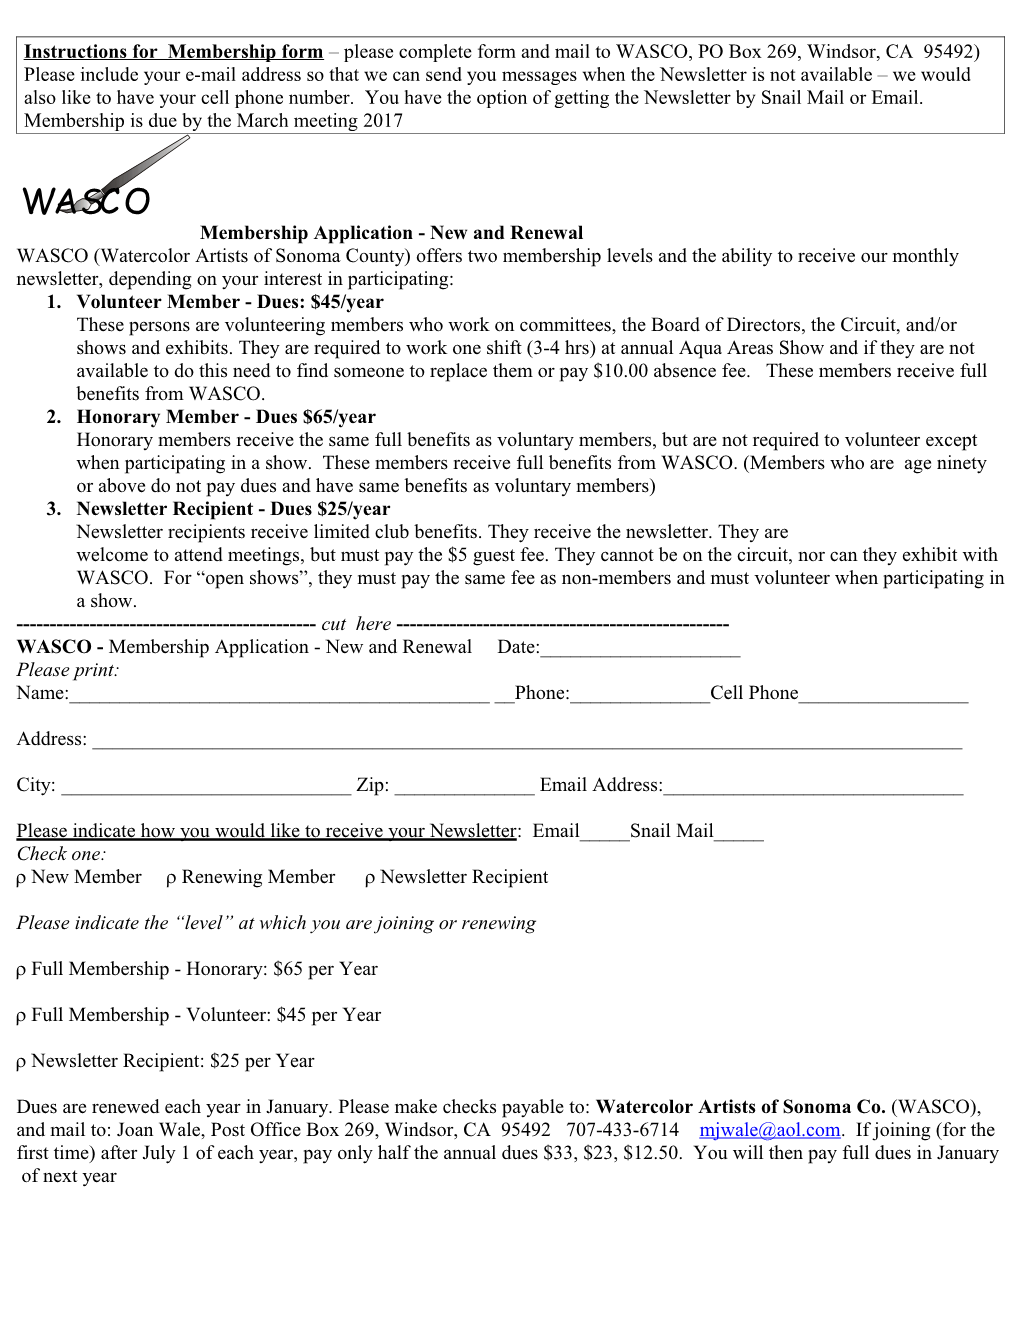 Instructions for Membership Form Please Complete Form and Mail to WASCO, PO Box 269, Windsor